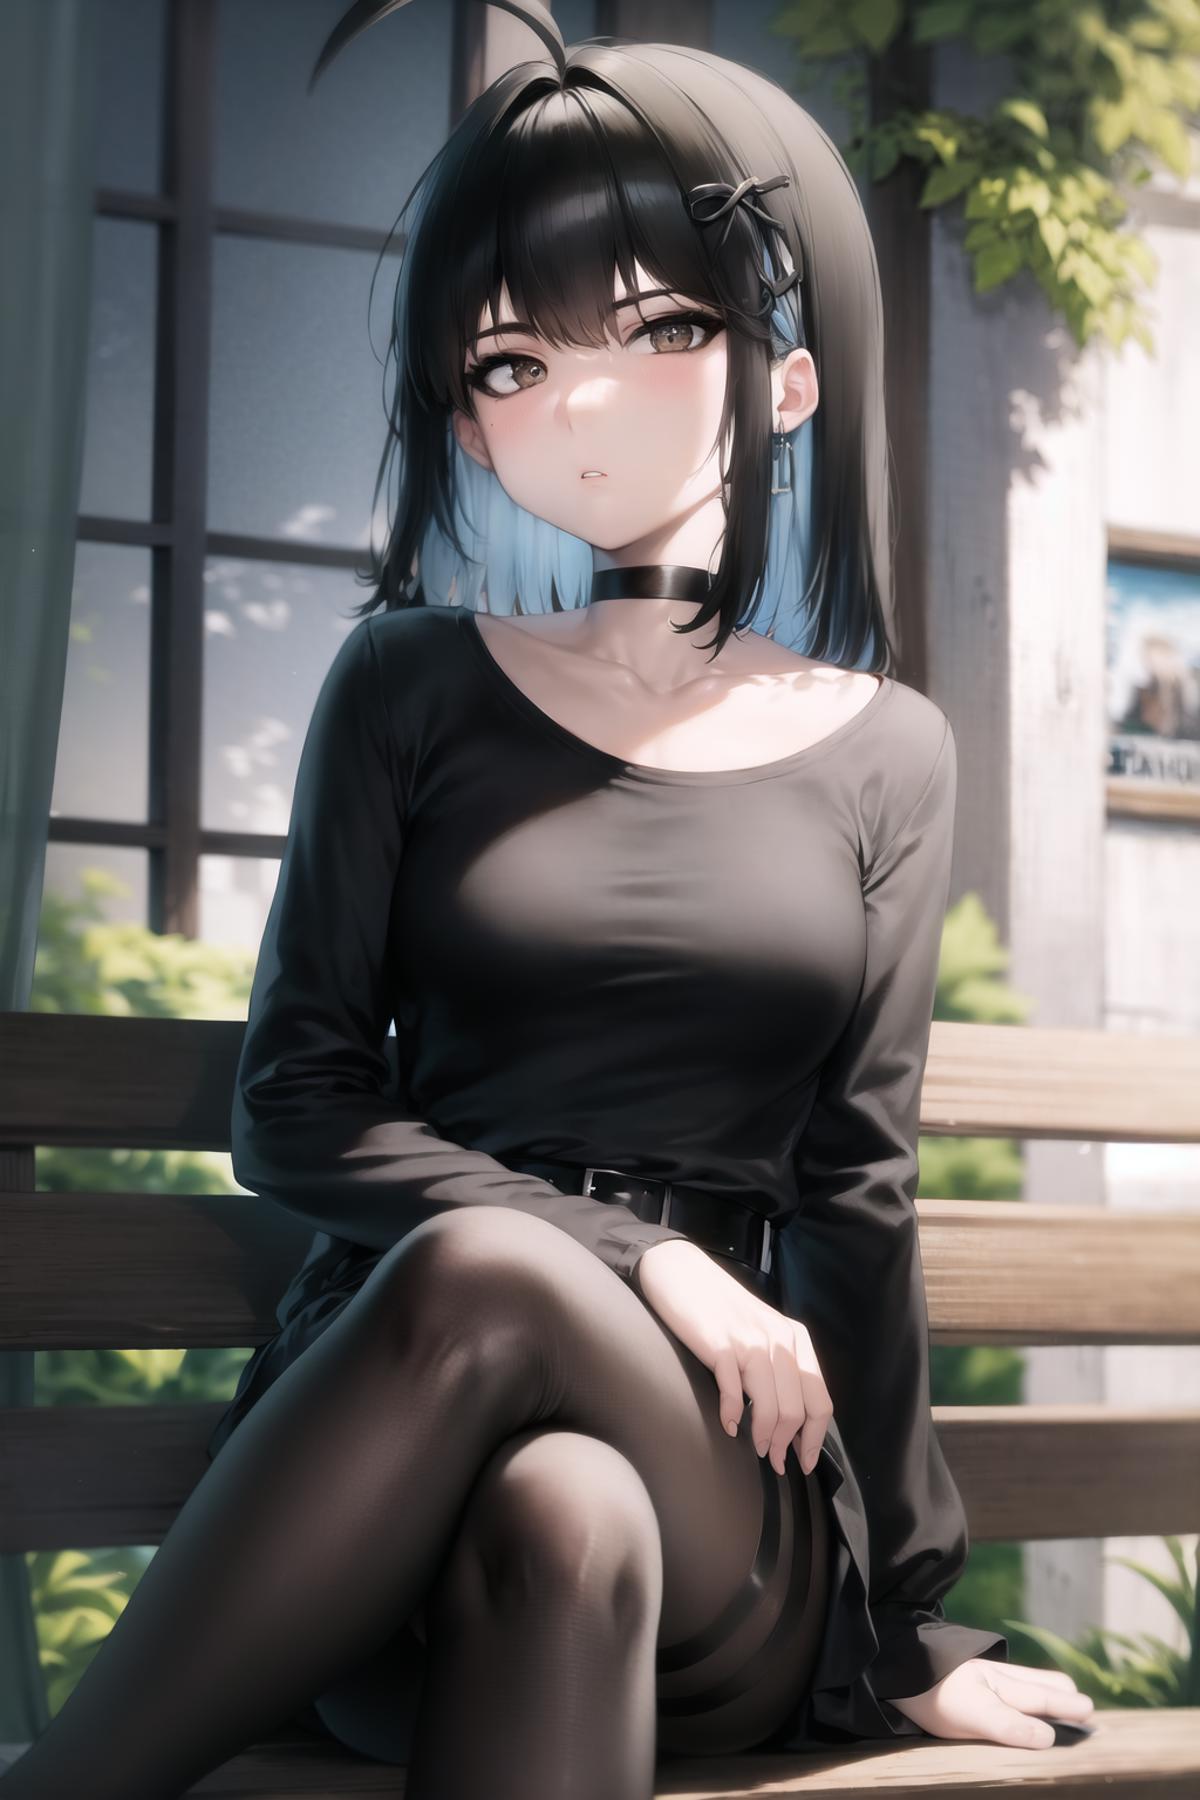 I have yet to replicate this outfit any ideas on tags? : r/NovelAi